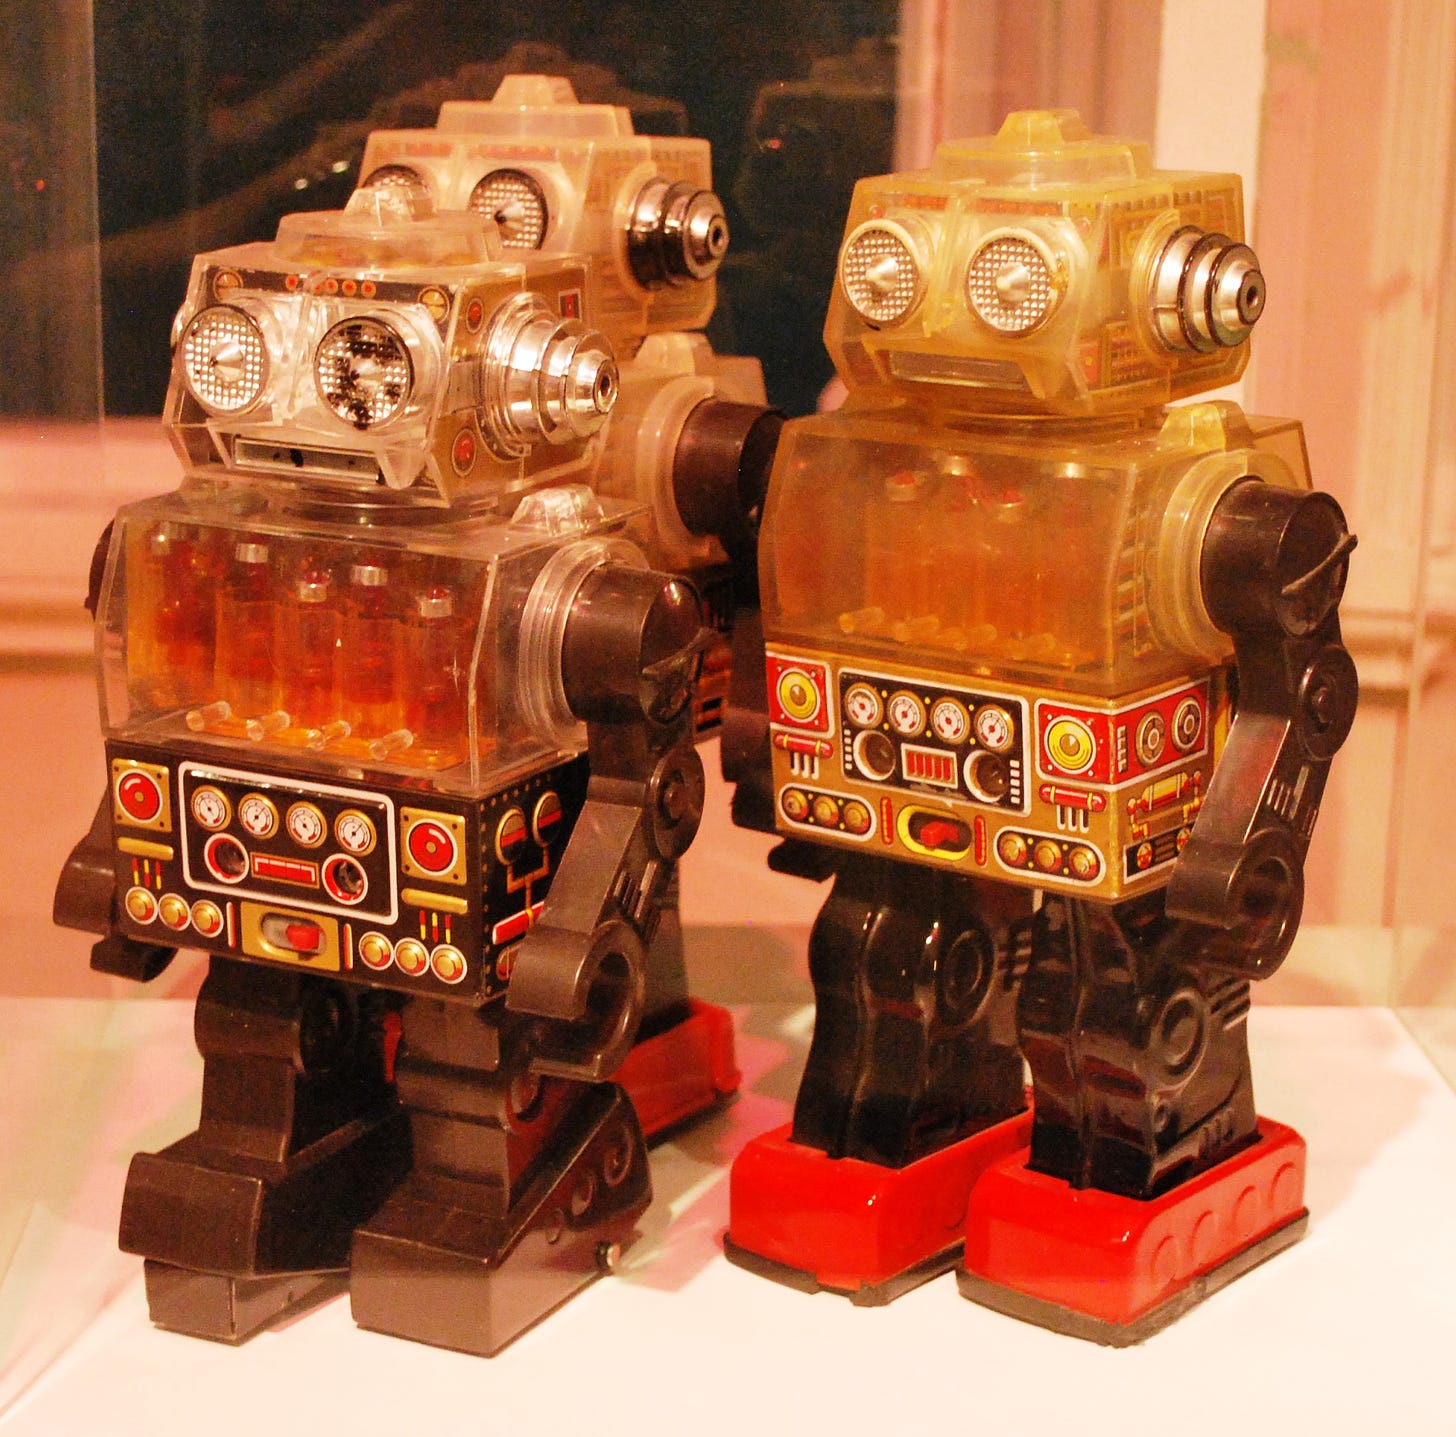 oy robots on display at the Museo del Objeto del Objeto in Mexico City Date 9 September 2011 Meet your new favorite band. https://commons.wikimedia.org/wiki/File:RobotsMODO.jpg AlejandroLinaresGarcia